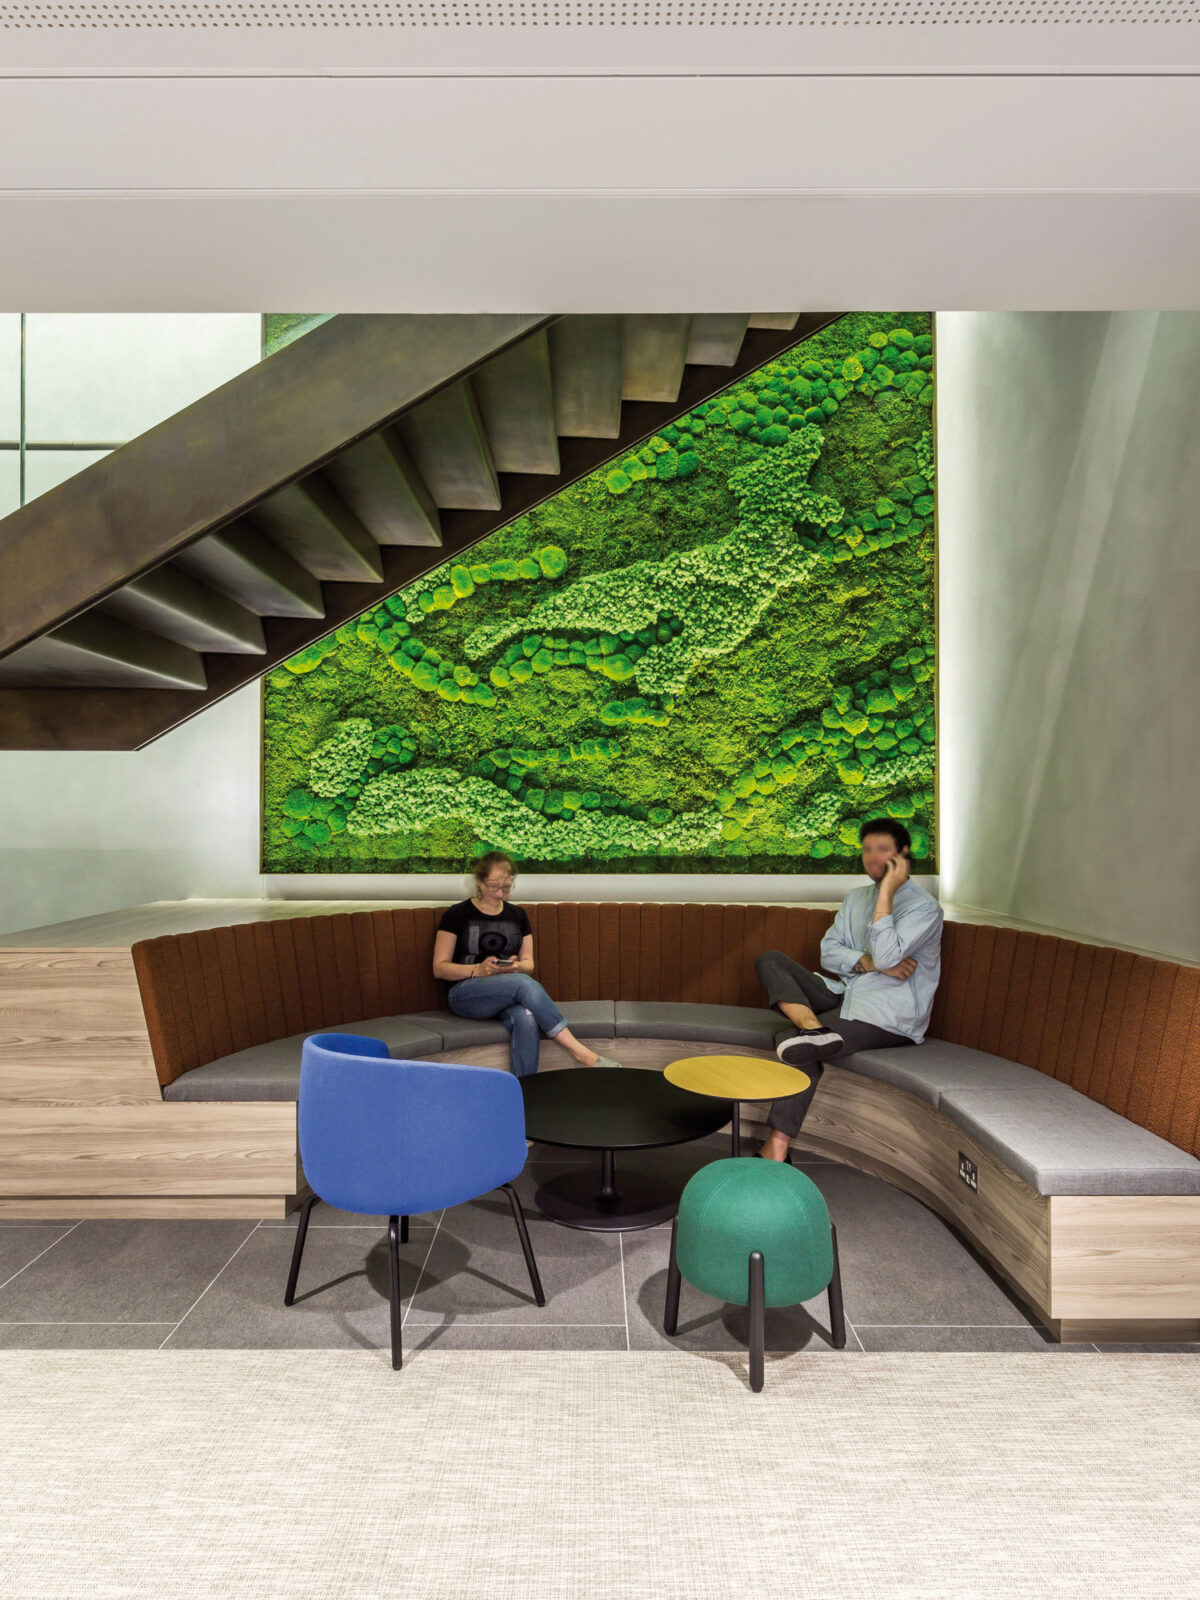 Modern stairwell adjacent to an expansive green moss wall. Below, a built-in wooden bench curves around the room, complemented by vibrant blue and yellow accent chairs and a round table, creating a dynamic waiting area.